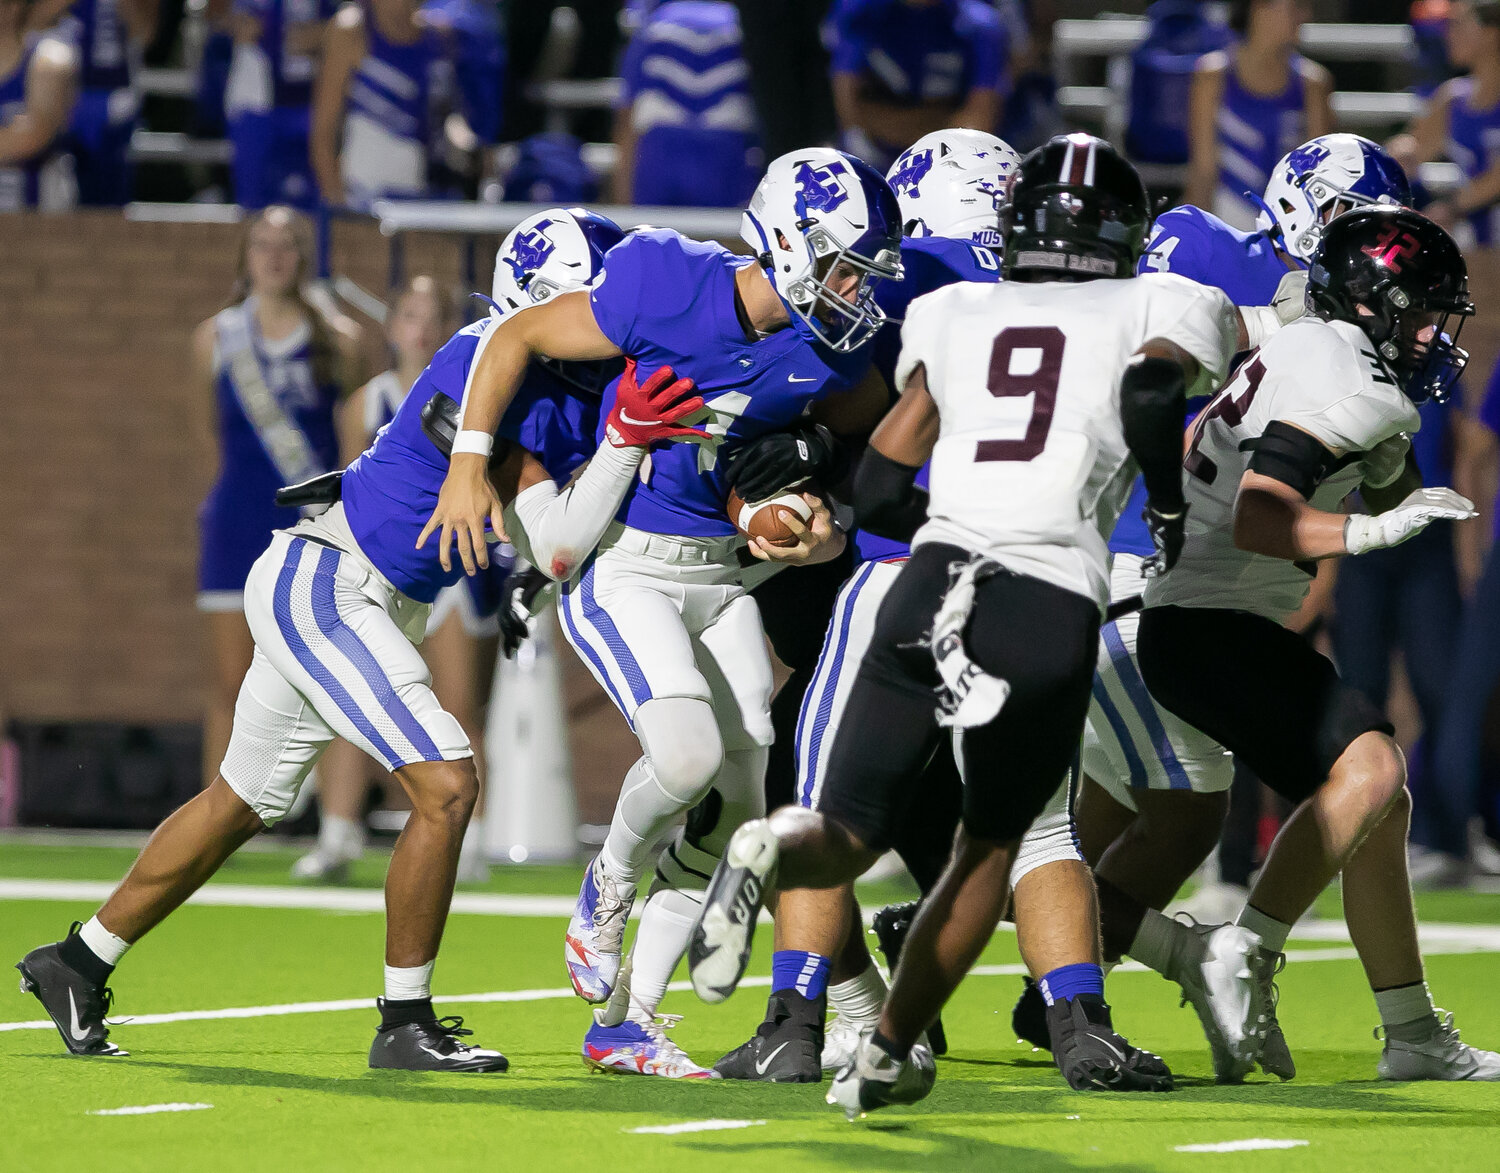 Daniel Bruns gets pushed towards the endzone during Thursday's game between Taylor and George Ranch at Rhodes Stadium.